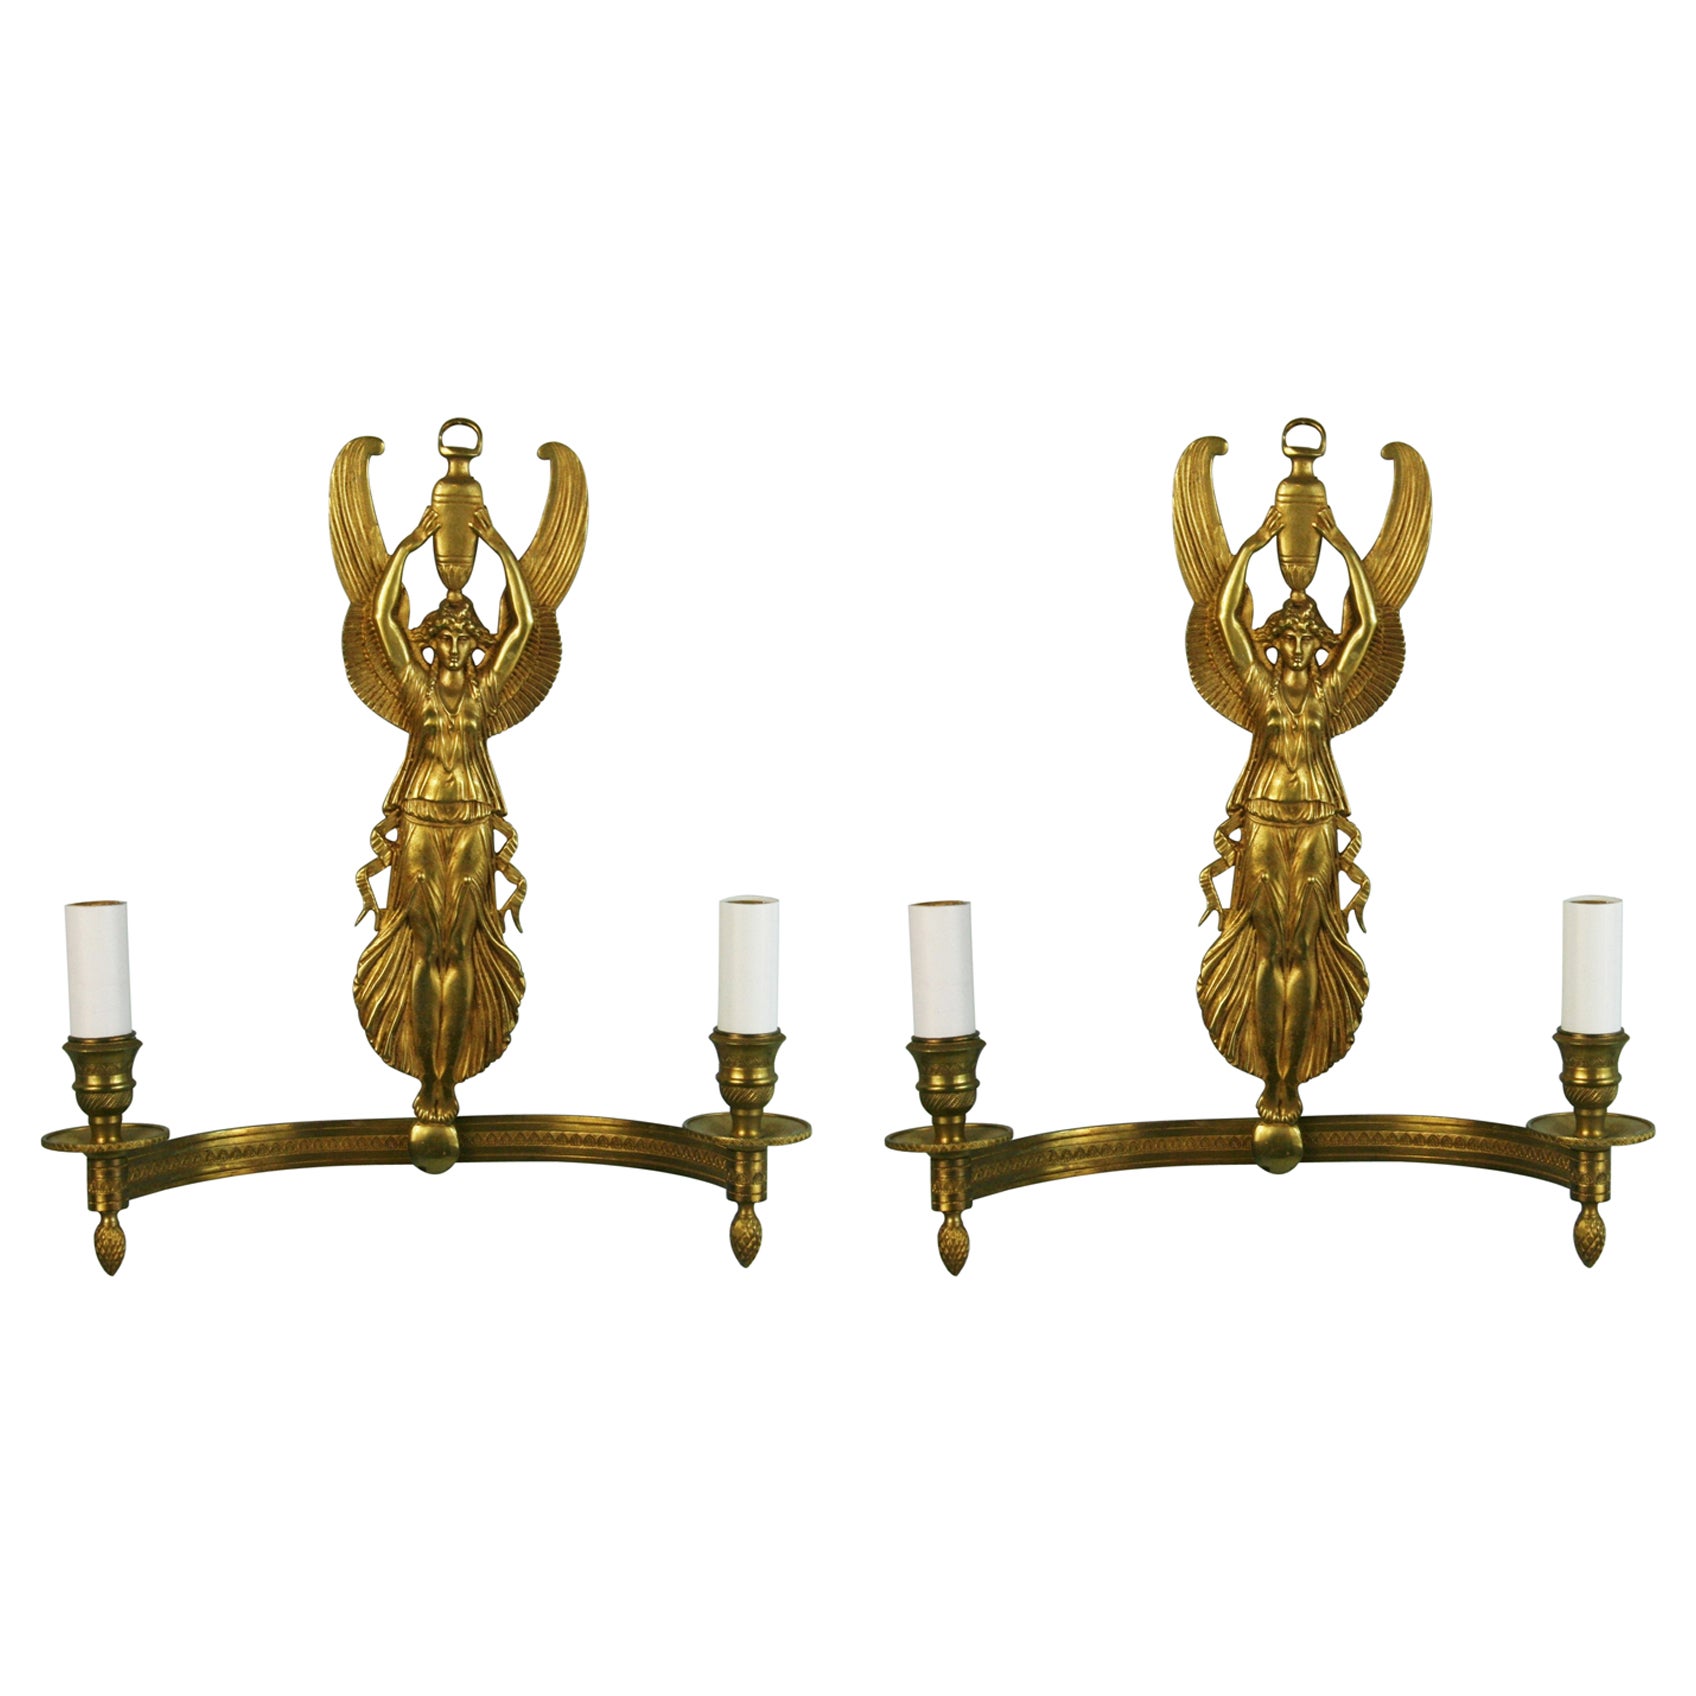 3-763 pair of French finely chased gilt brass two light sconces.
Needs rewiring for USA